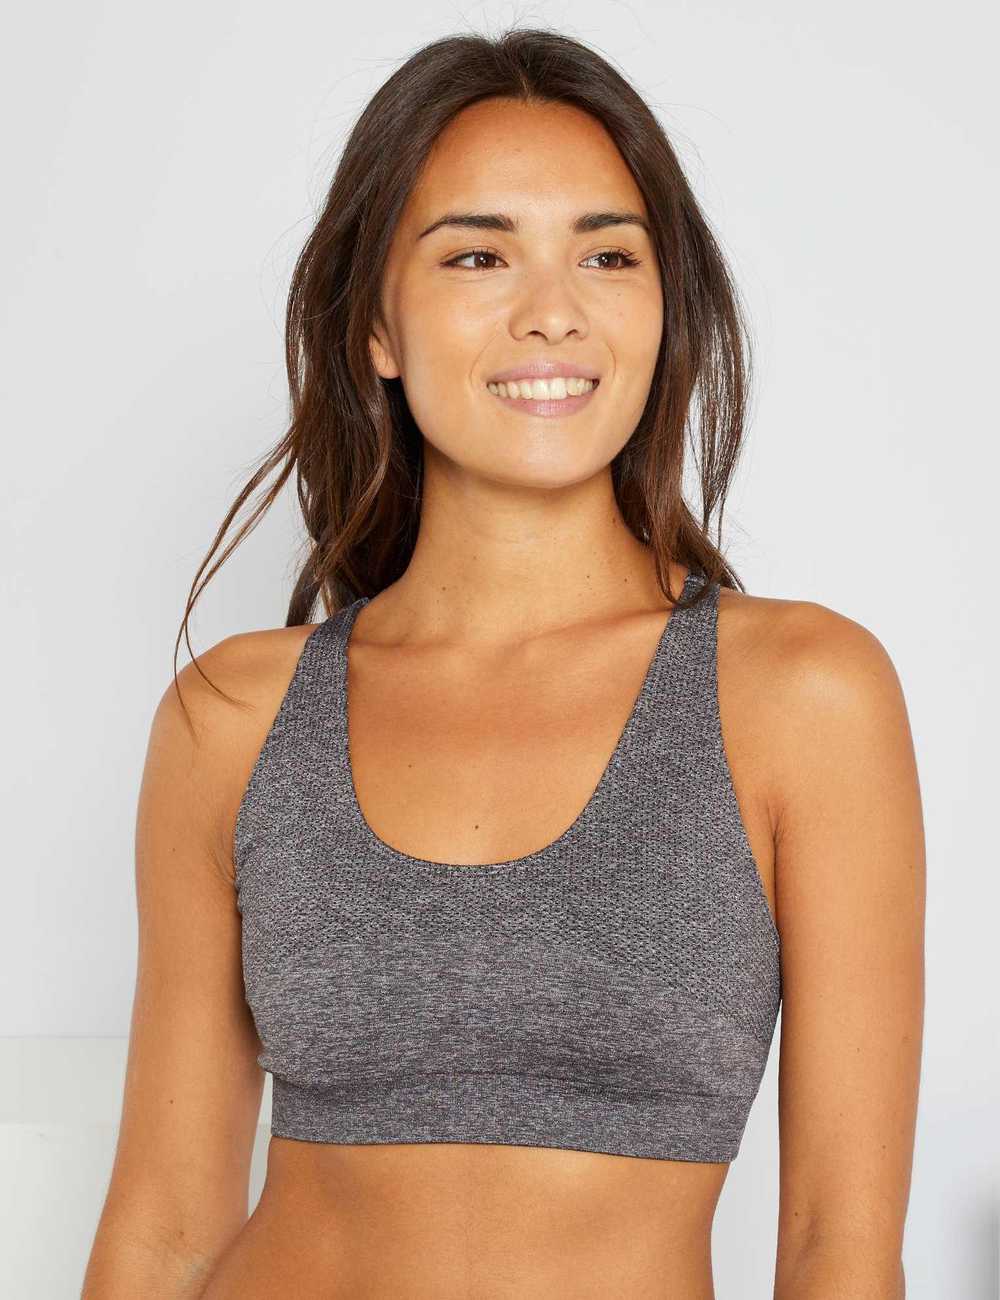 Buy Sports bra with removable pre-formed cups Online in Dubai & the  UAE